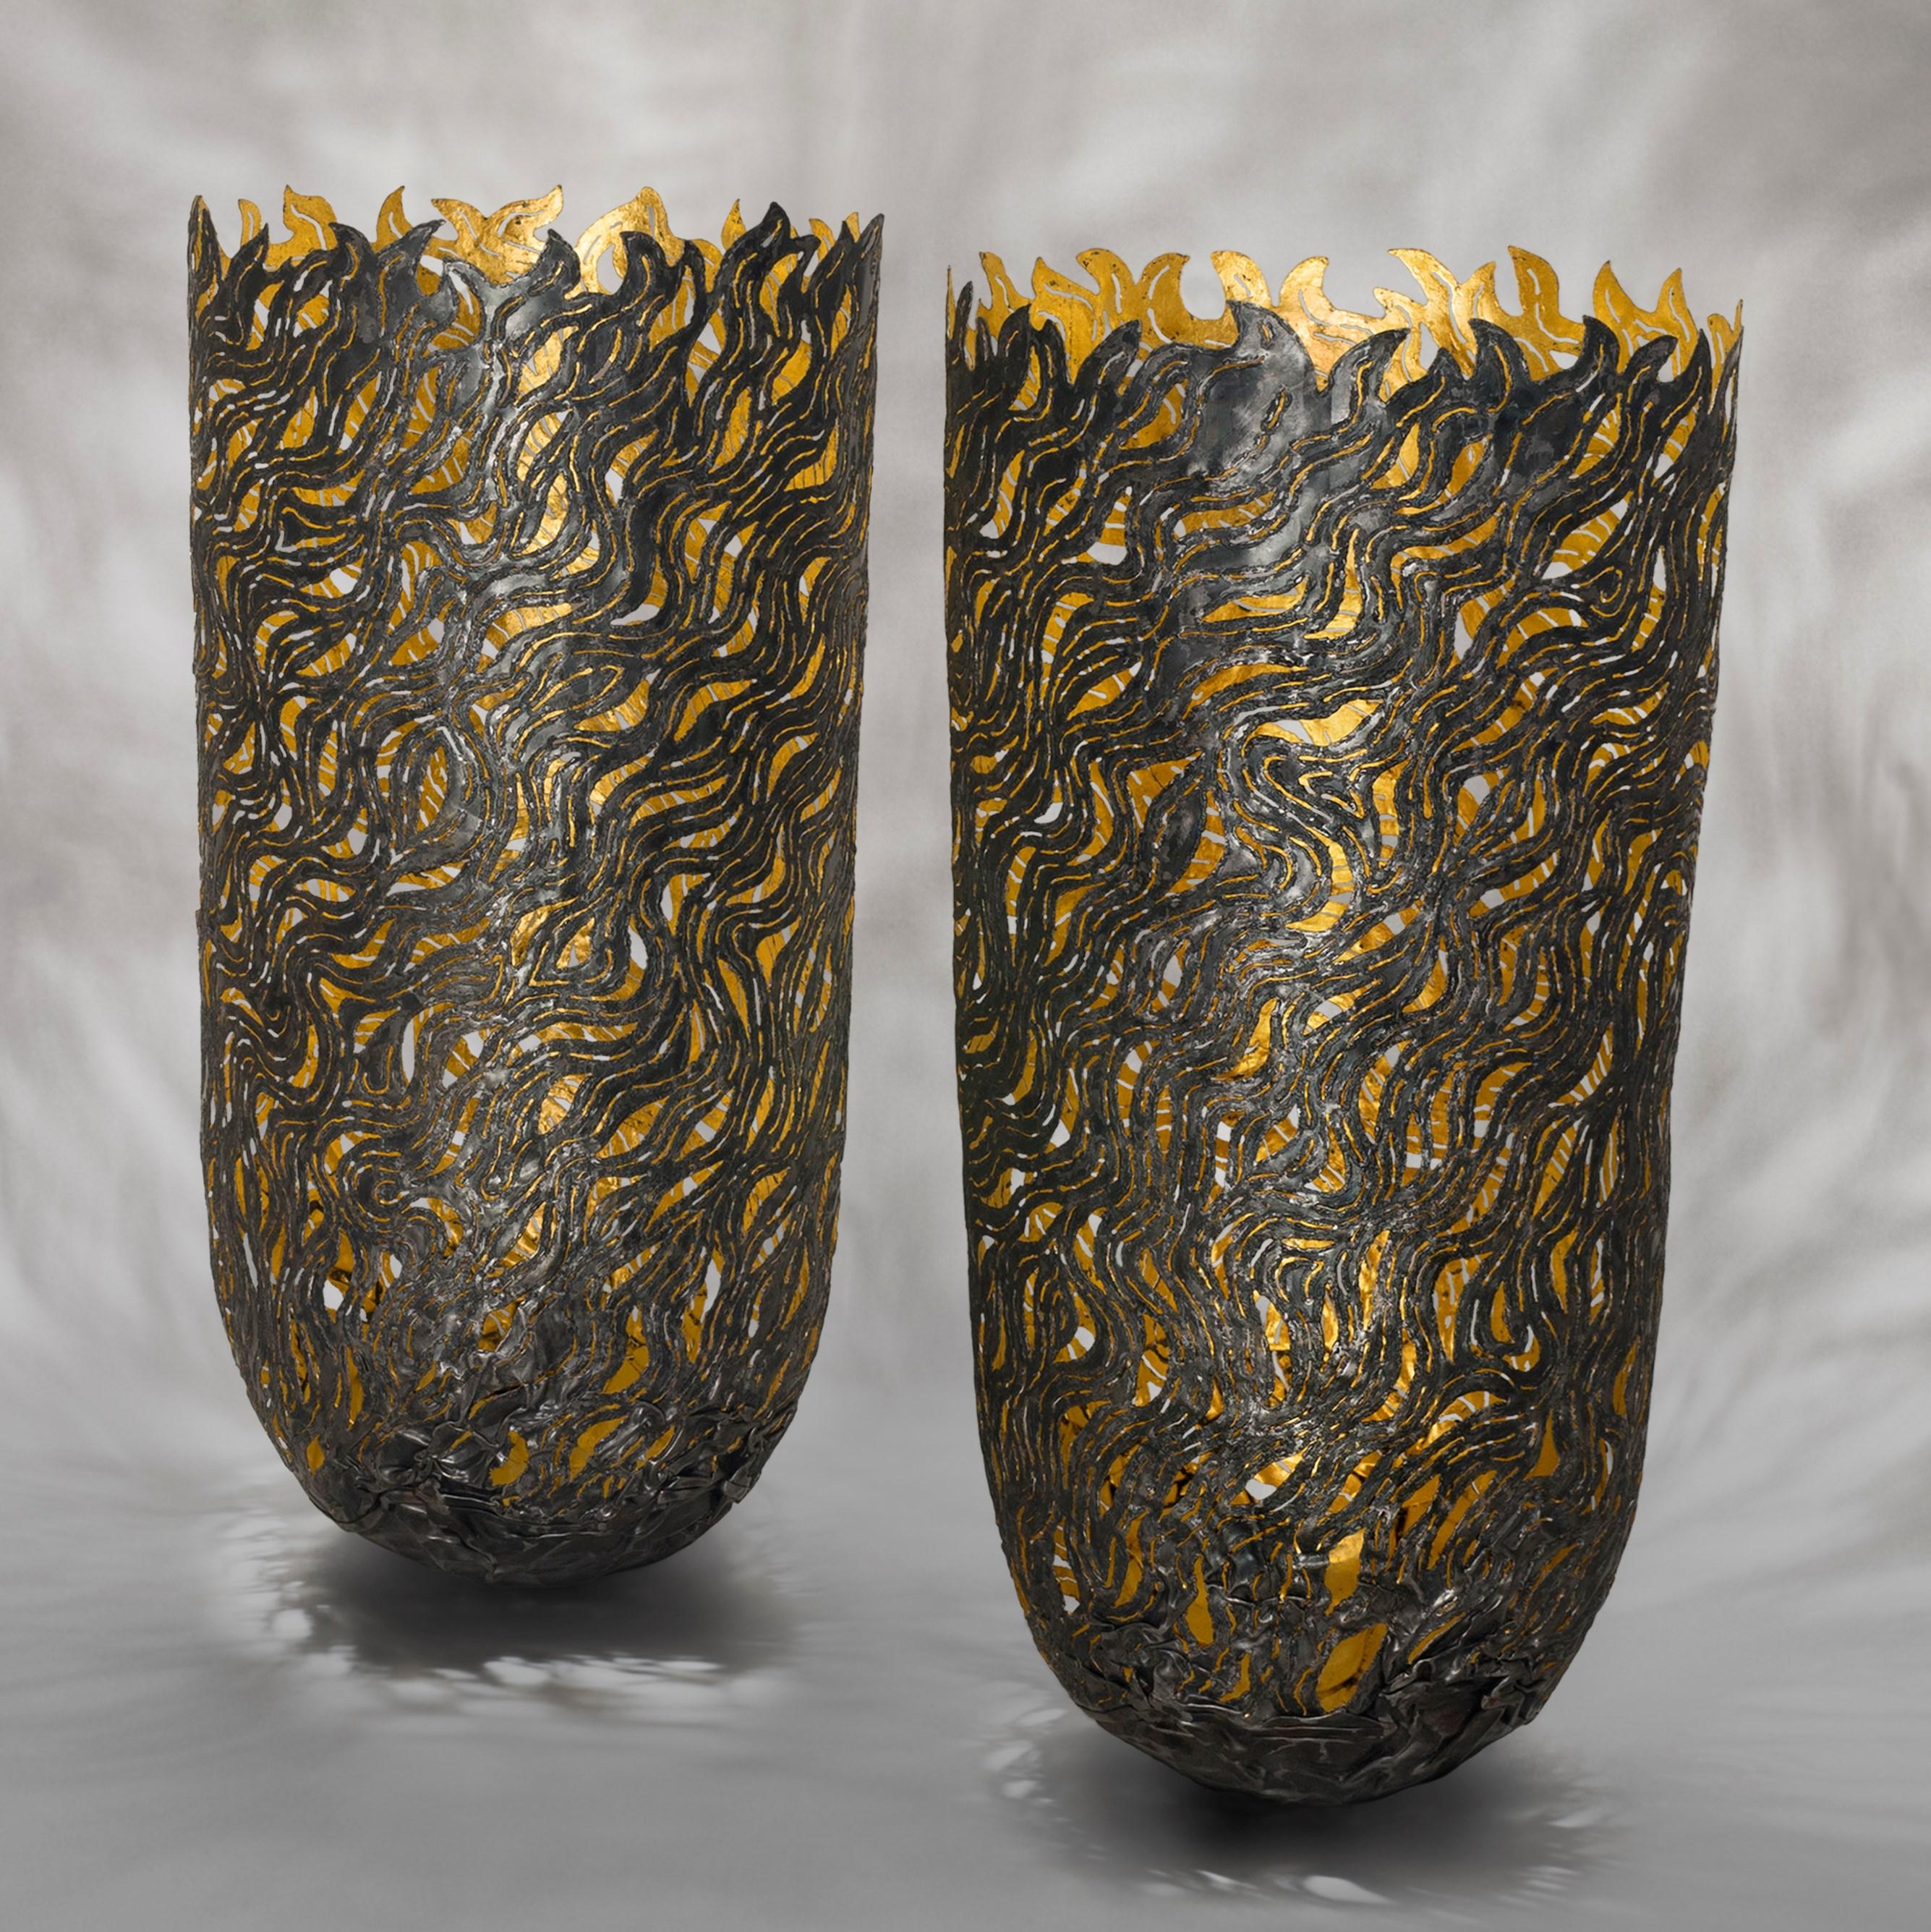 British  Autumn Dance Vessels, organic textured steel & gold vessels by Claire Malet For Sale